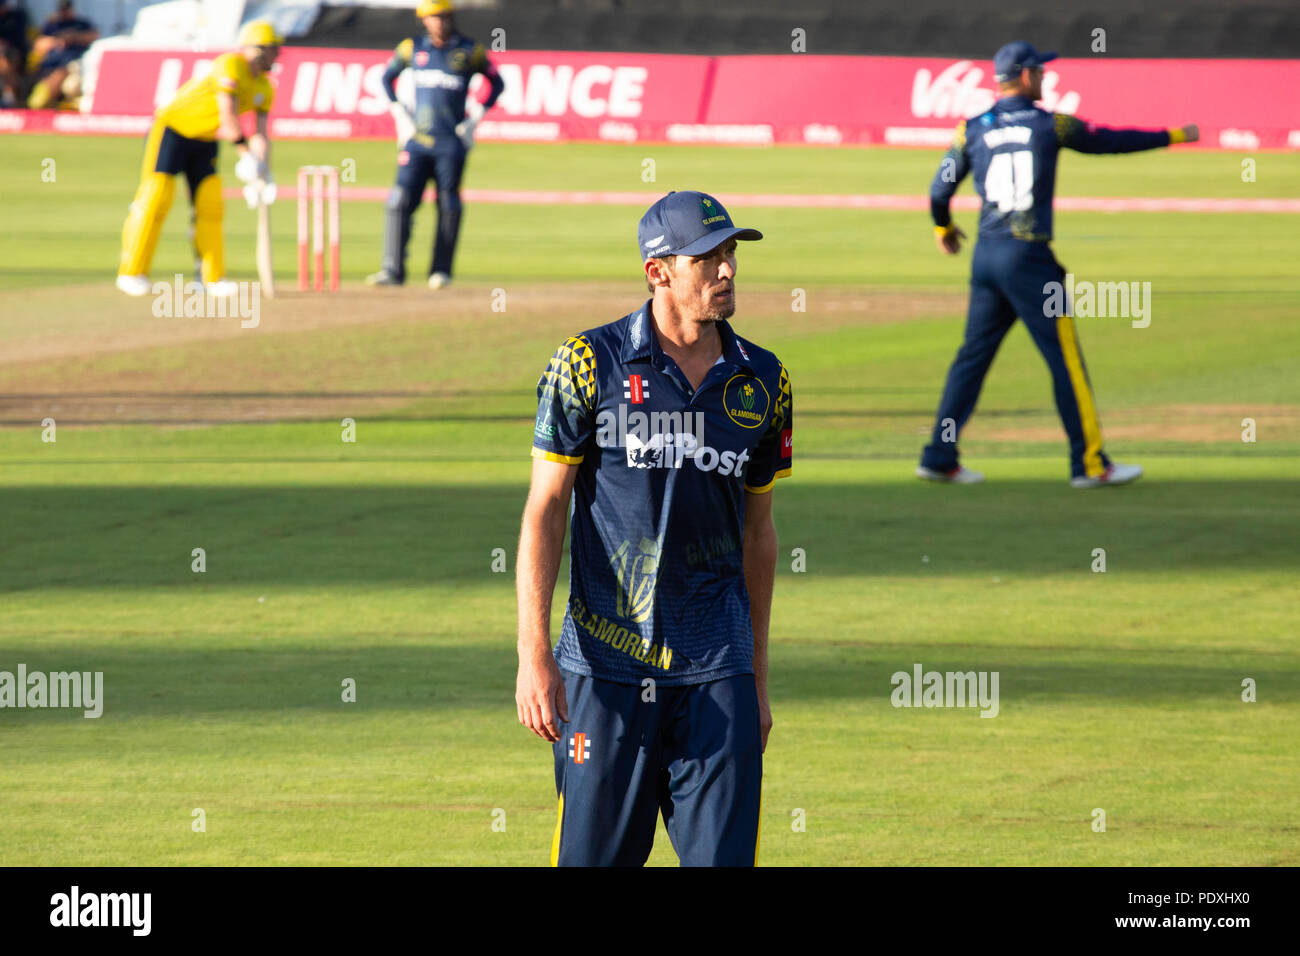 Sophia Gardens, Cardiff, Wales, United Kingdom. Glamorgan hosted Hampshire for a crunch game in the Vitality Blast 20/20 Cricket South Group Stage on 10 August 2018 at Sophia Gardens in Cardiff. Pictured: MG Hogan of Glamorgan. Credit: Rob Watkins/Alamy Live News Stock Photo